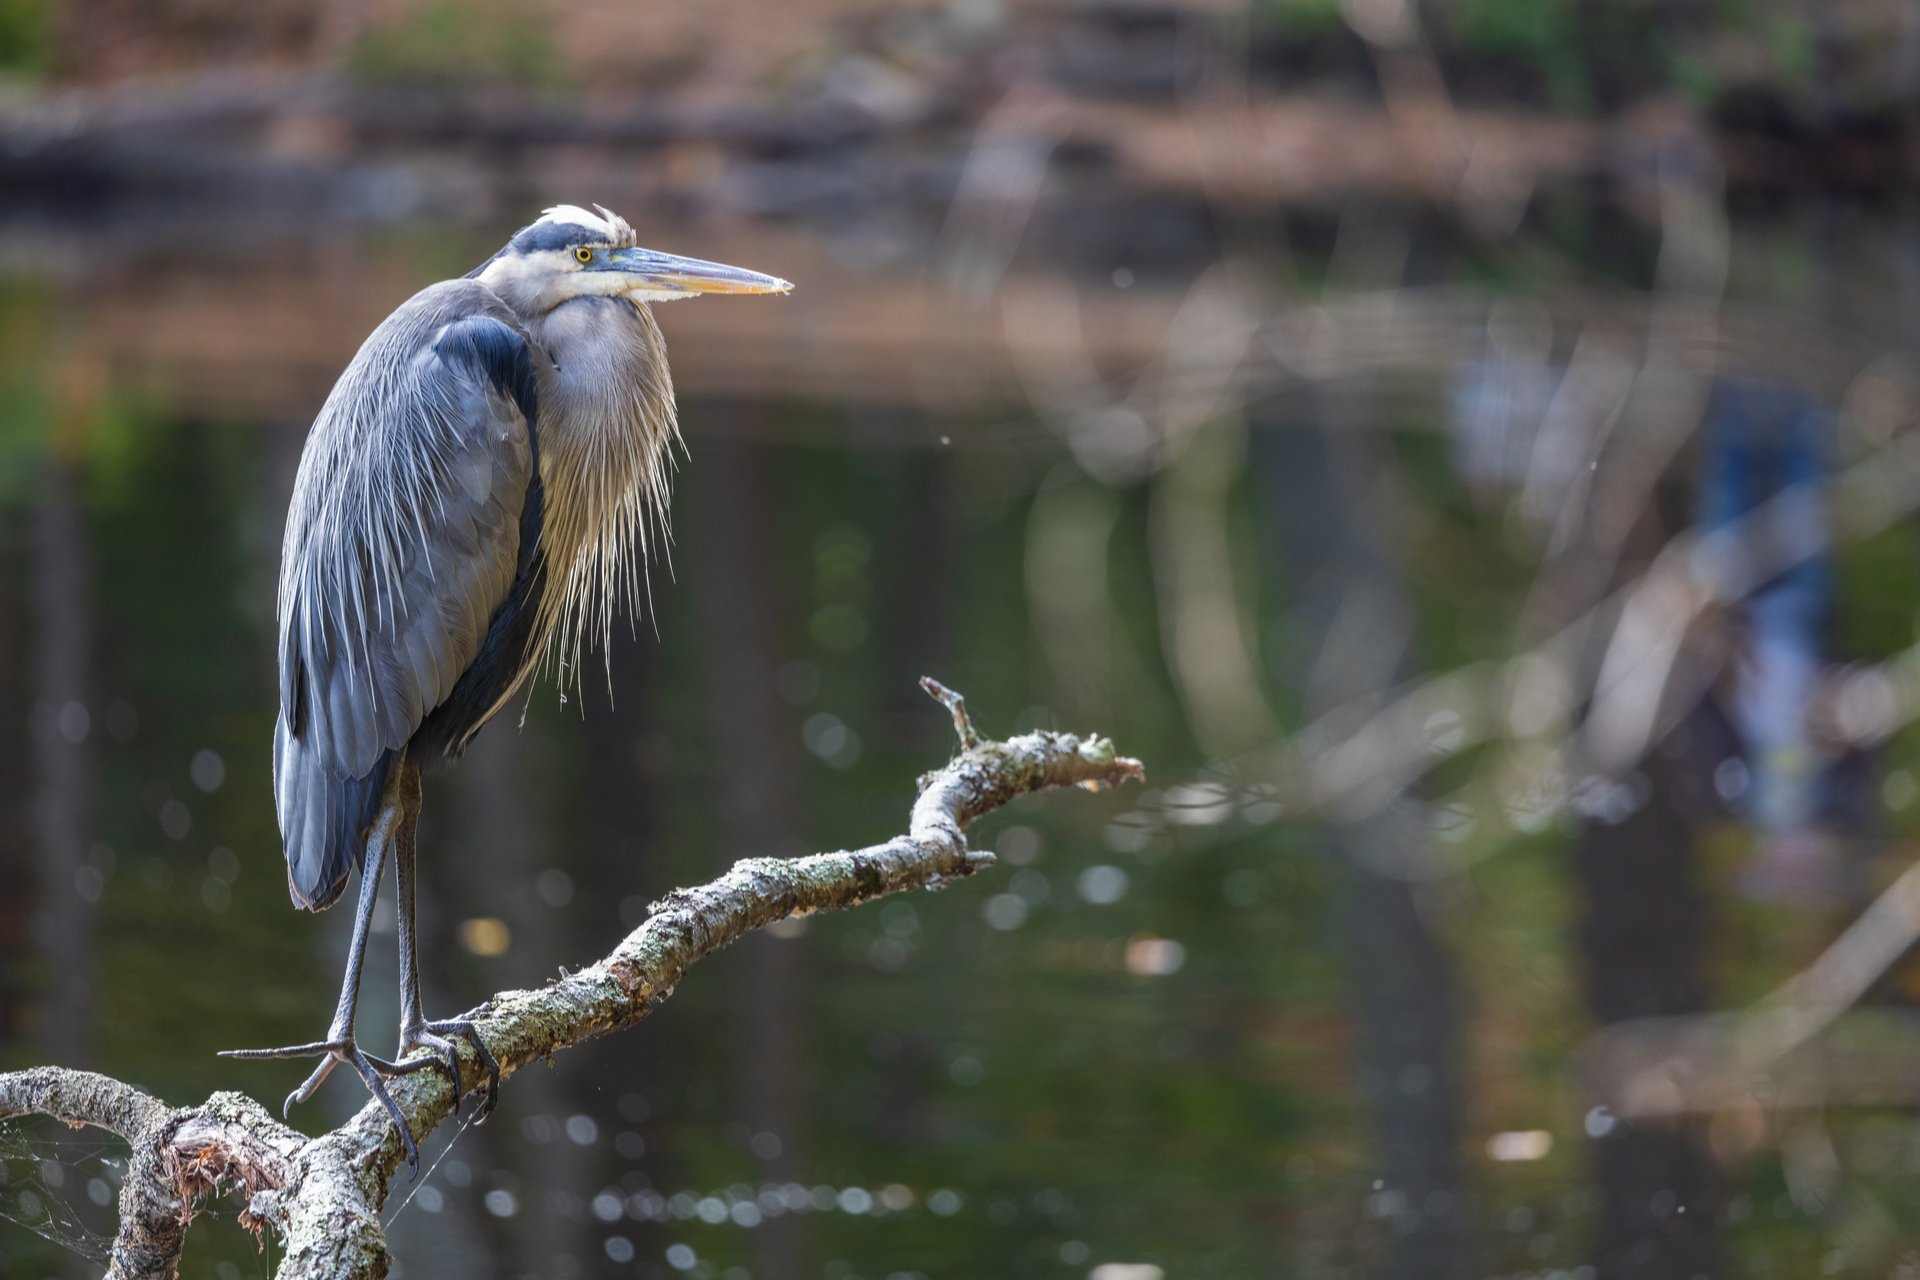 Great Blue Heron perched on branch